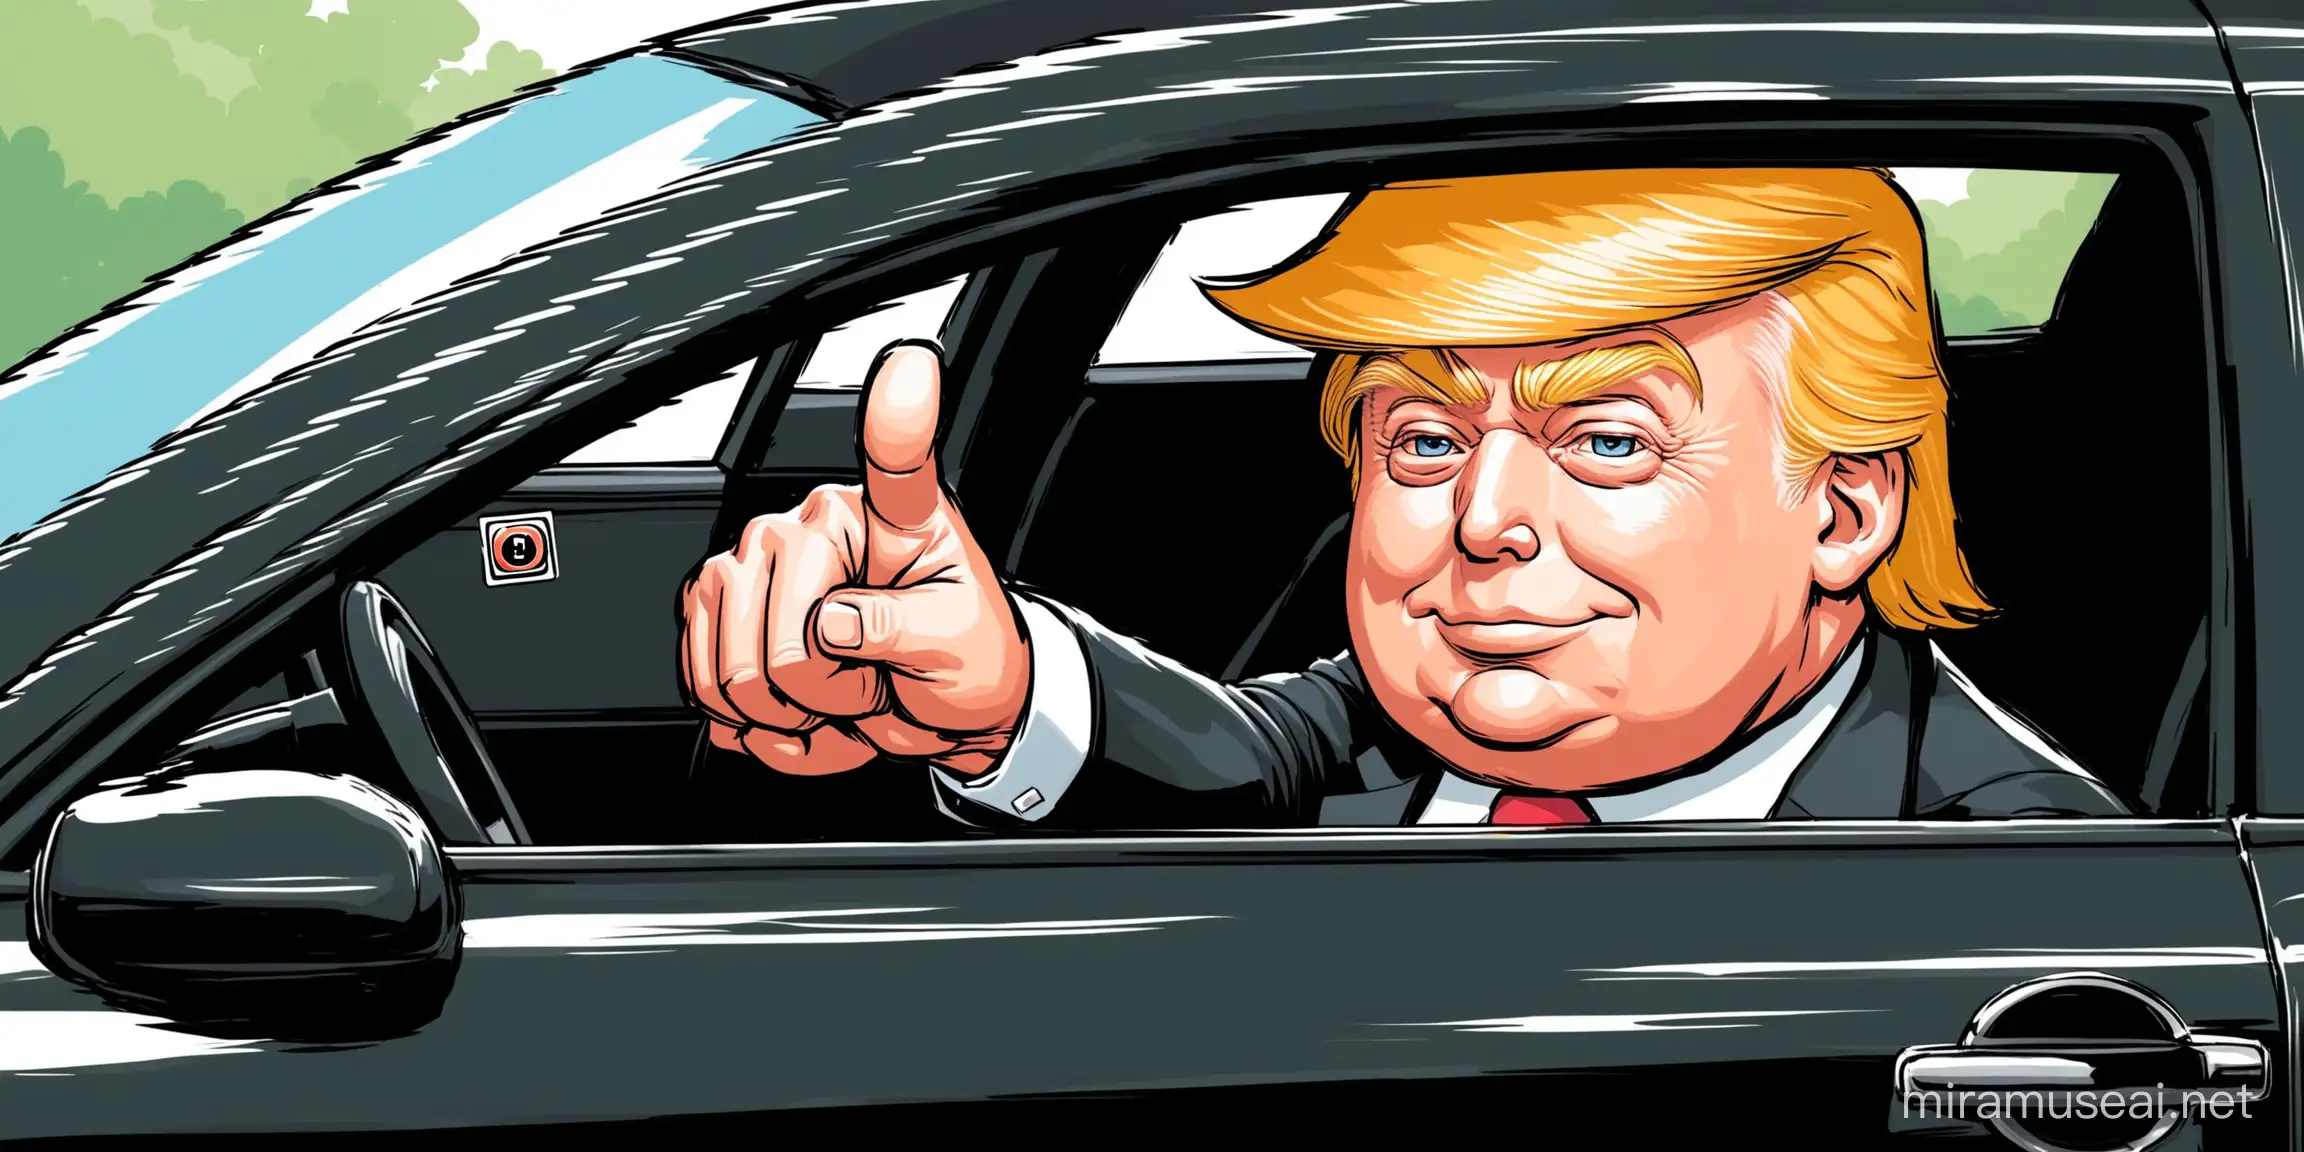 Cartoon President Giving Thumbs Up from a Black Car